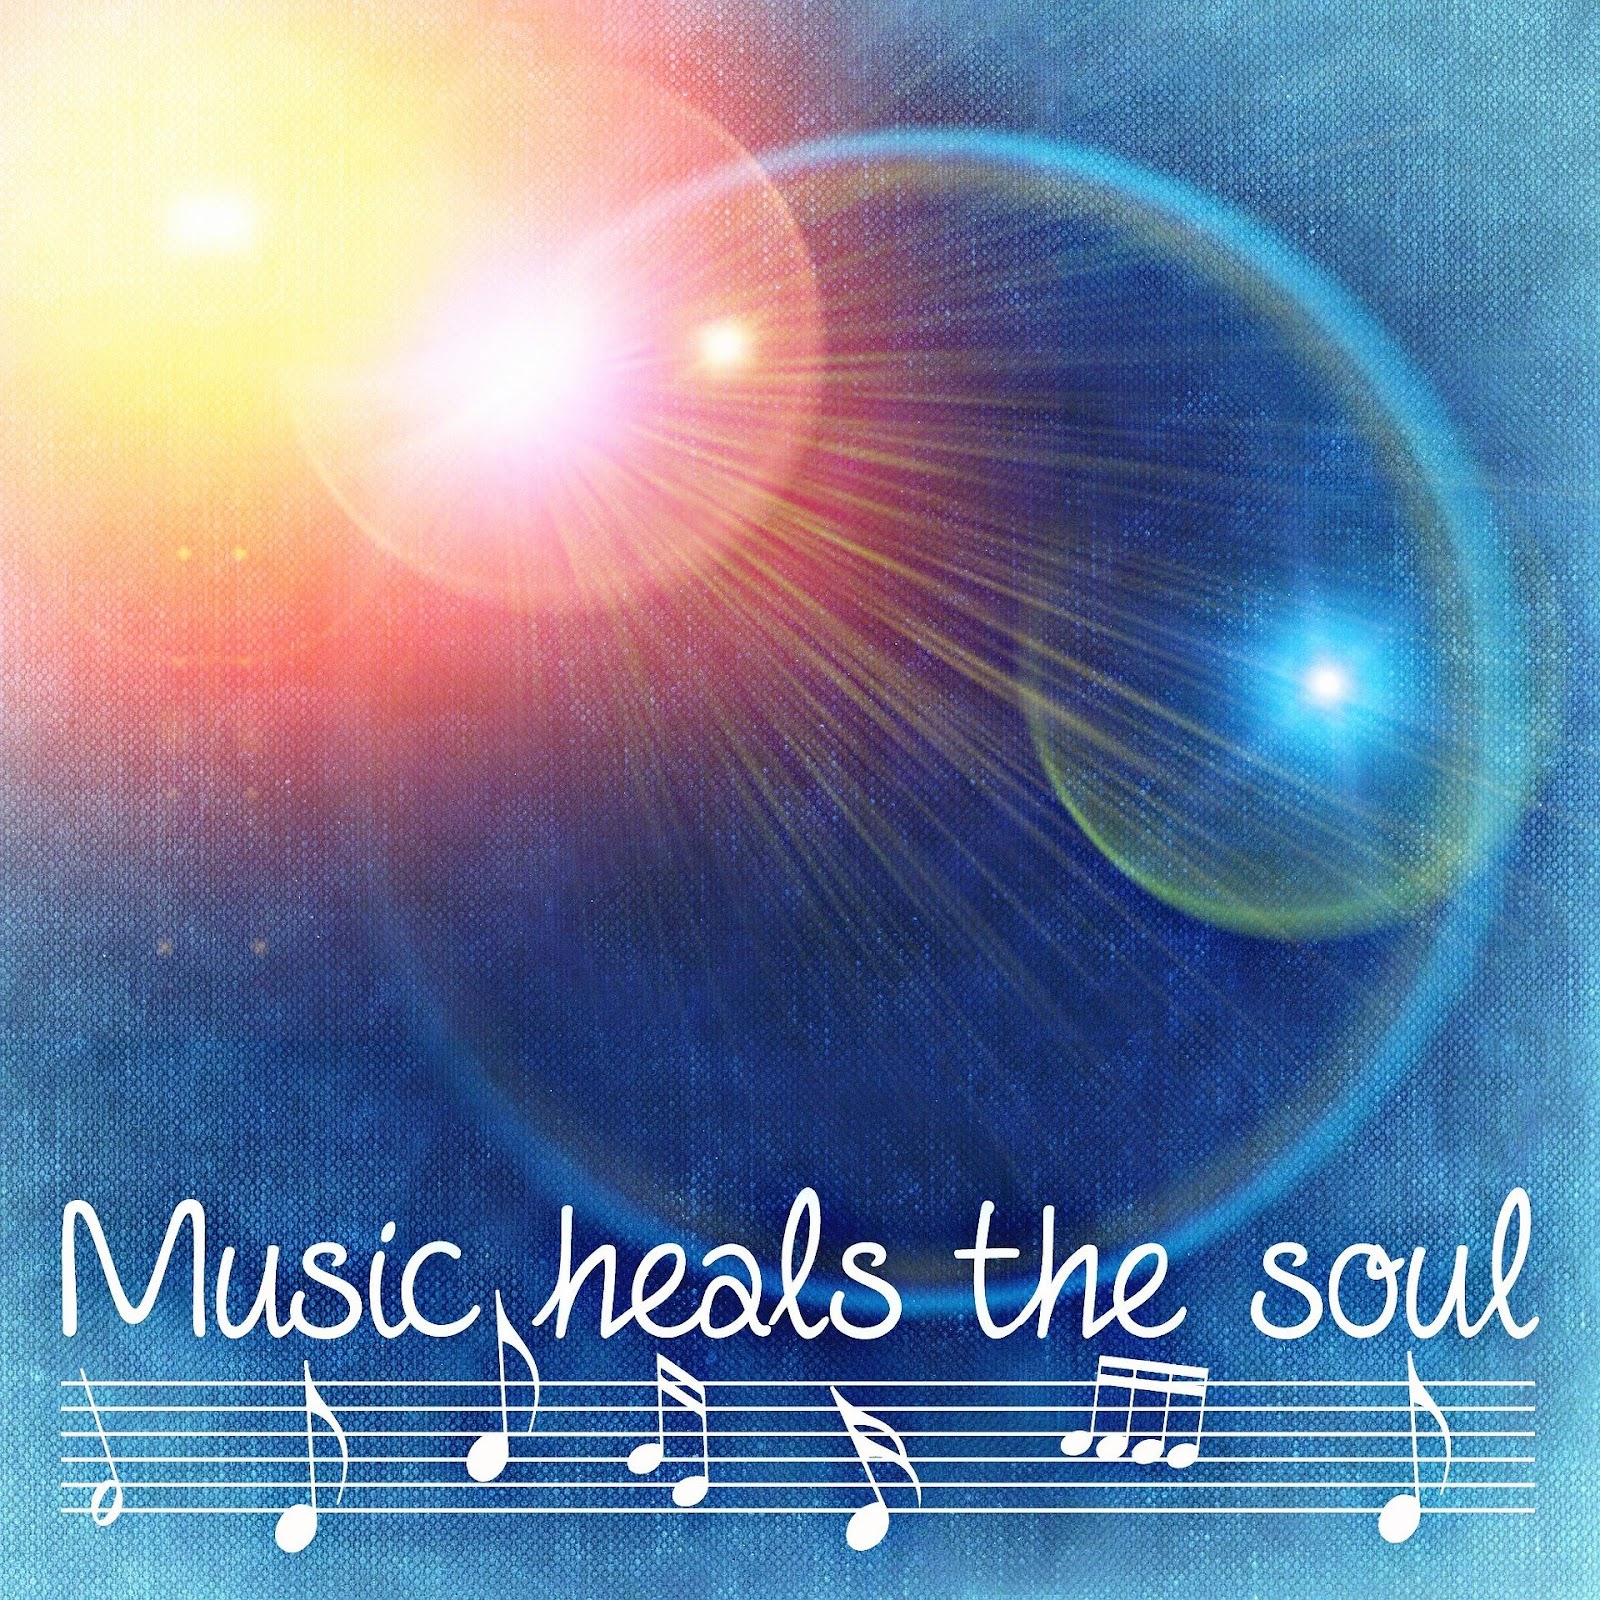 Music heals the soul graphic